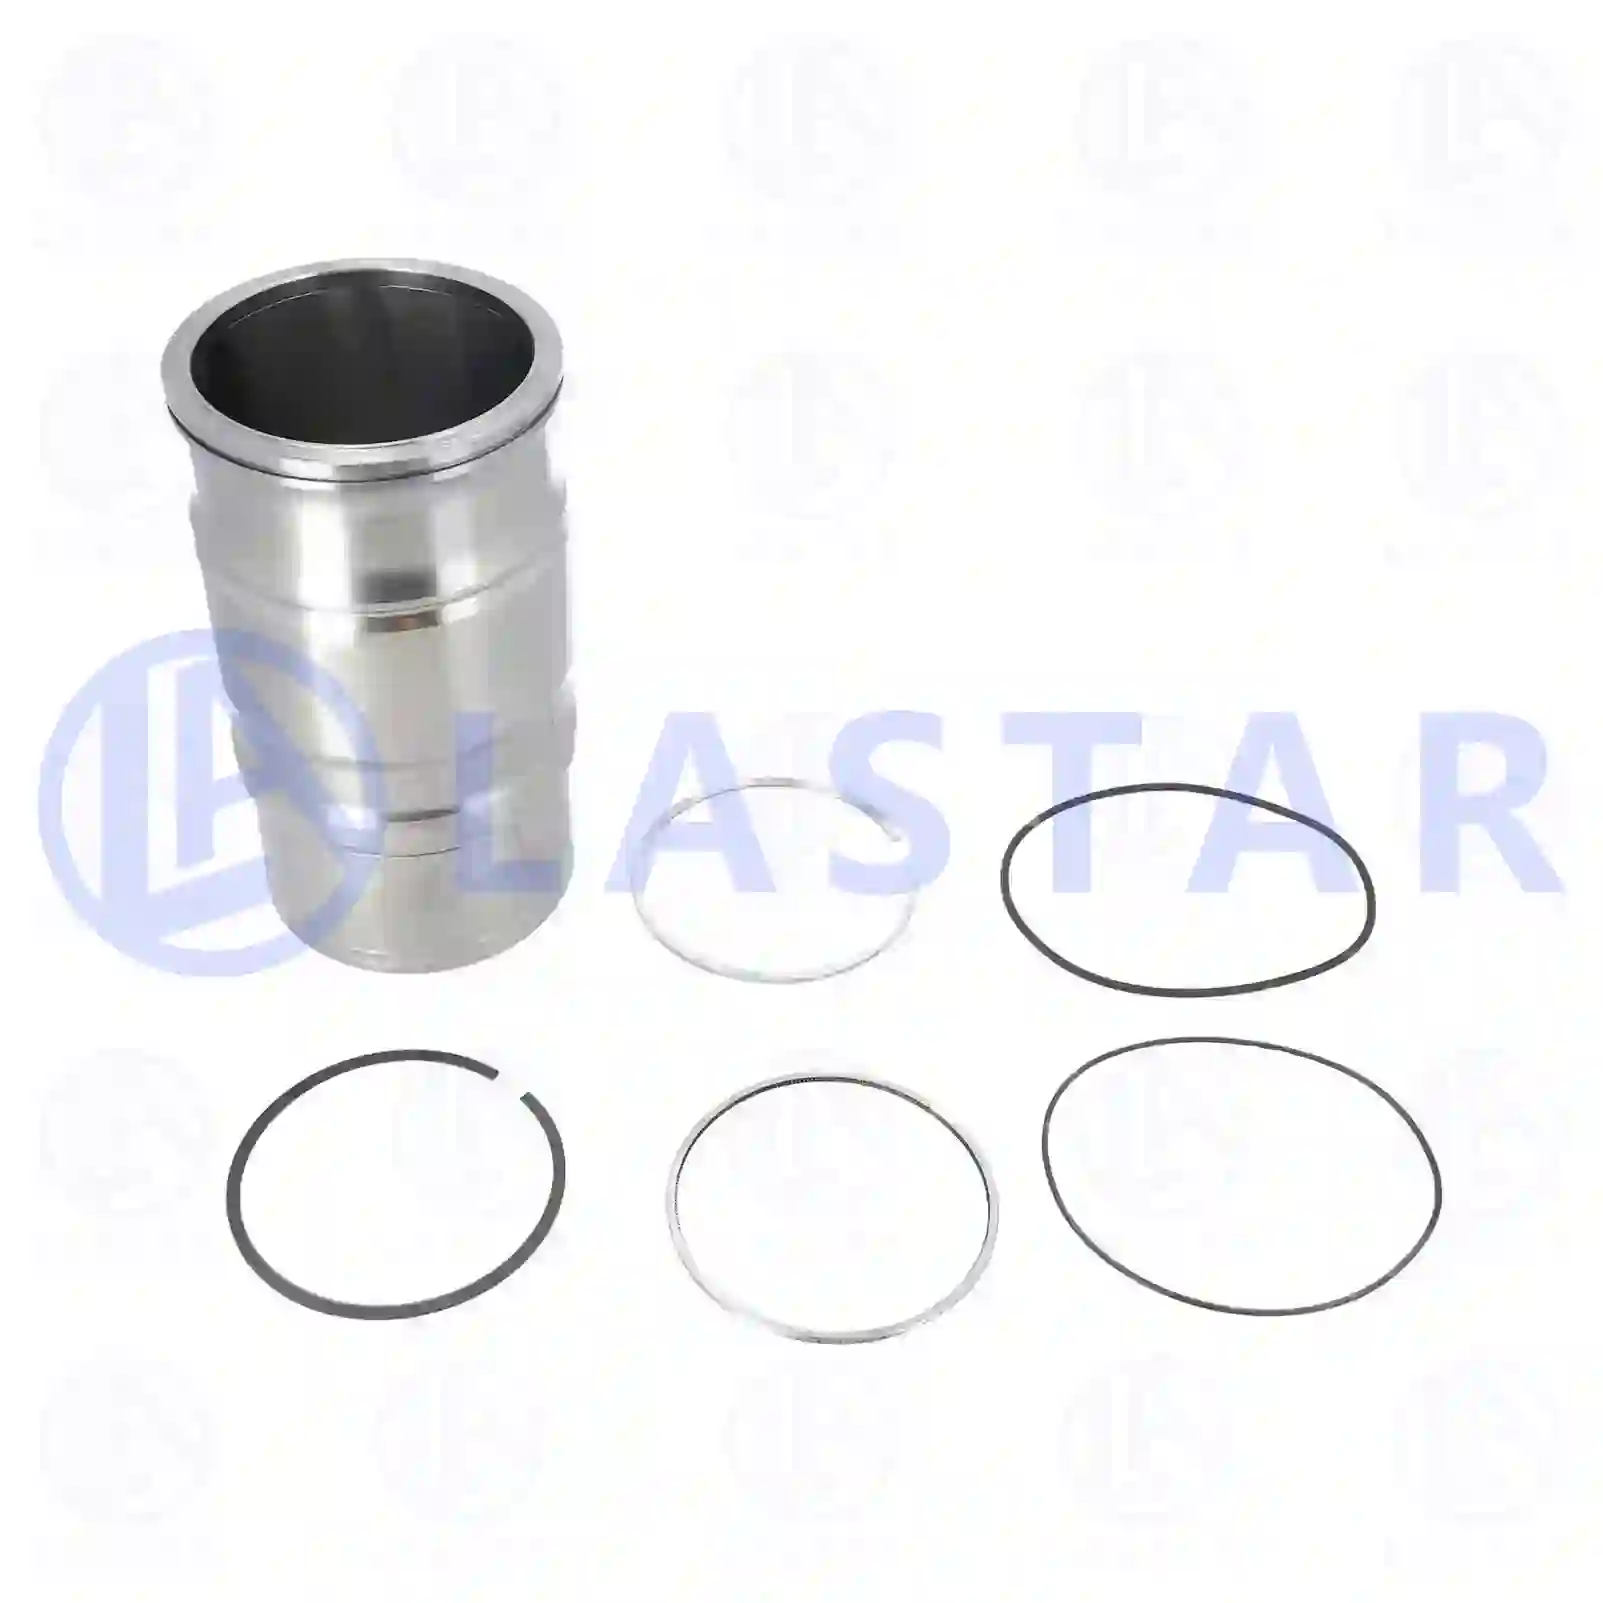  Cylinder liner, with piston rings || Lastar Spare Part | Truck Spare Parts, Auotomotive Spare Parts